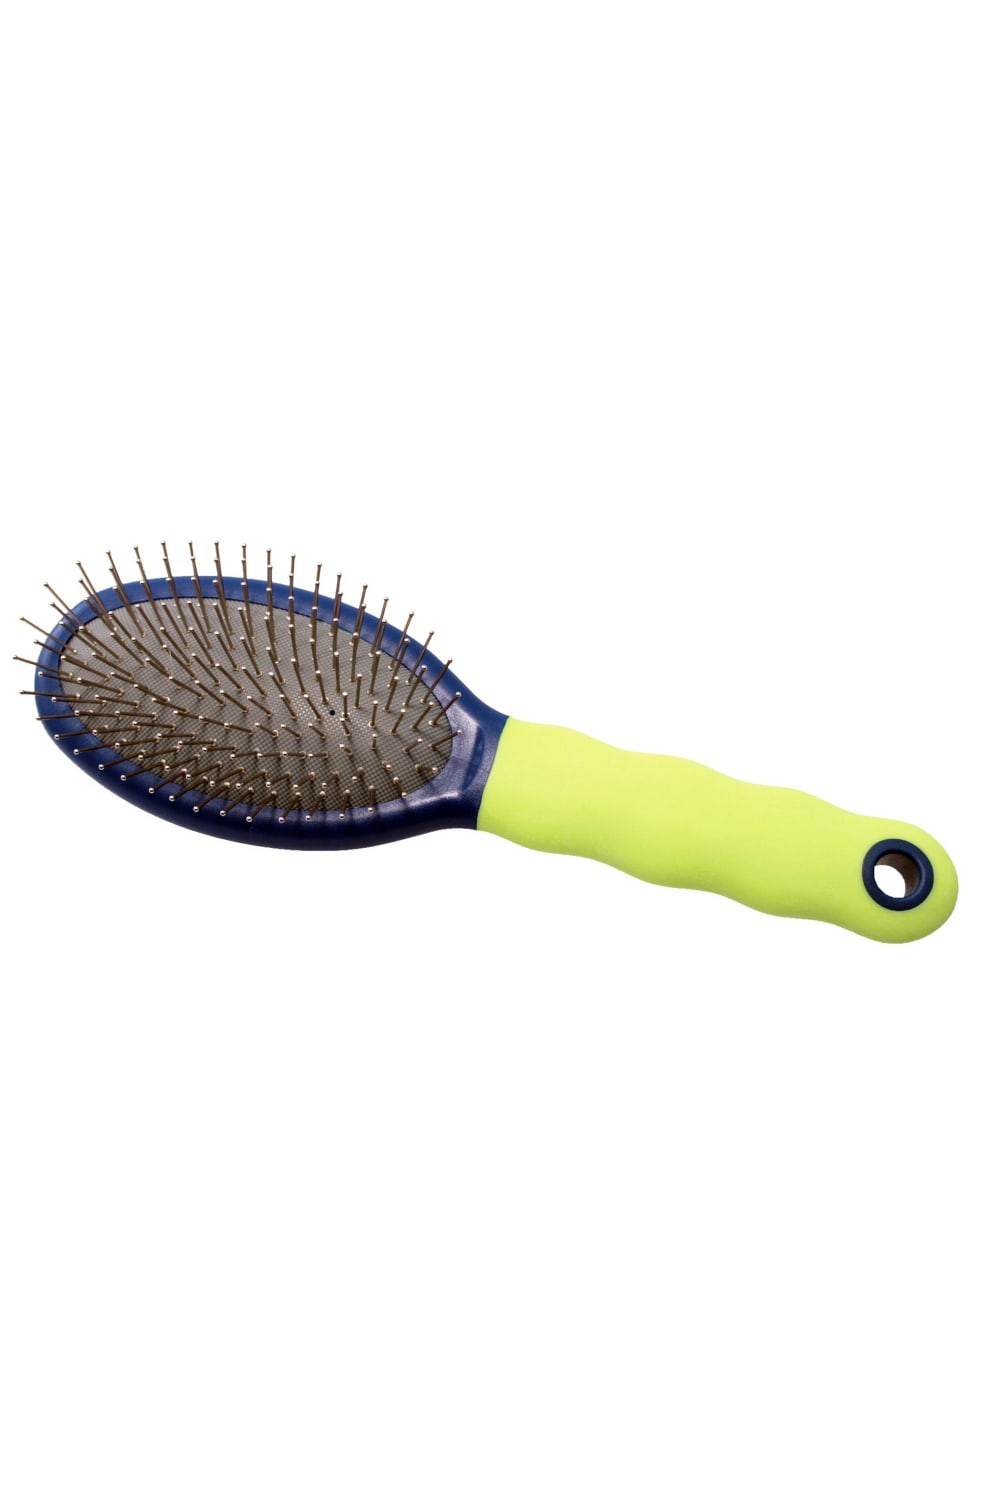 Premo Steel Pin Brush (May Vary) (One Size)